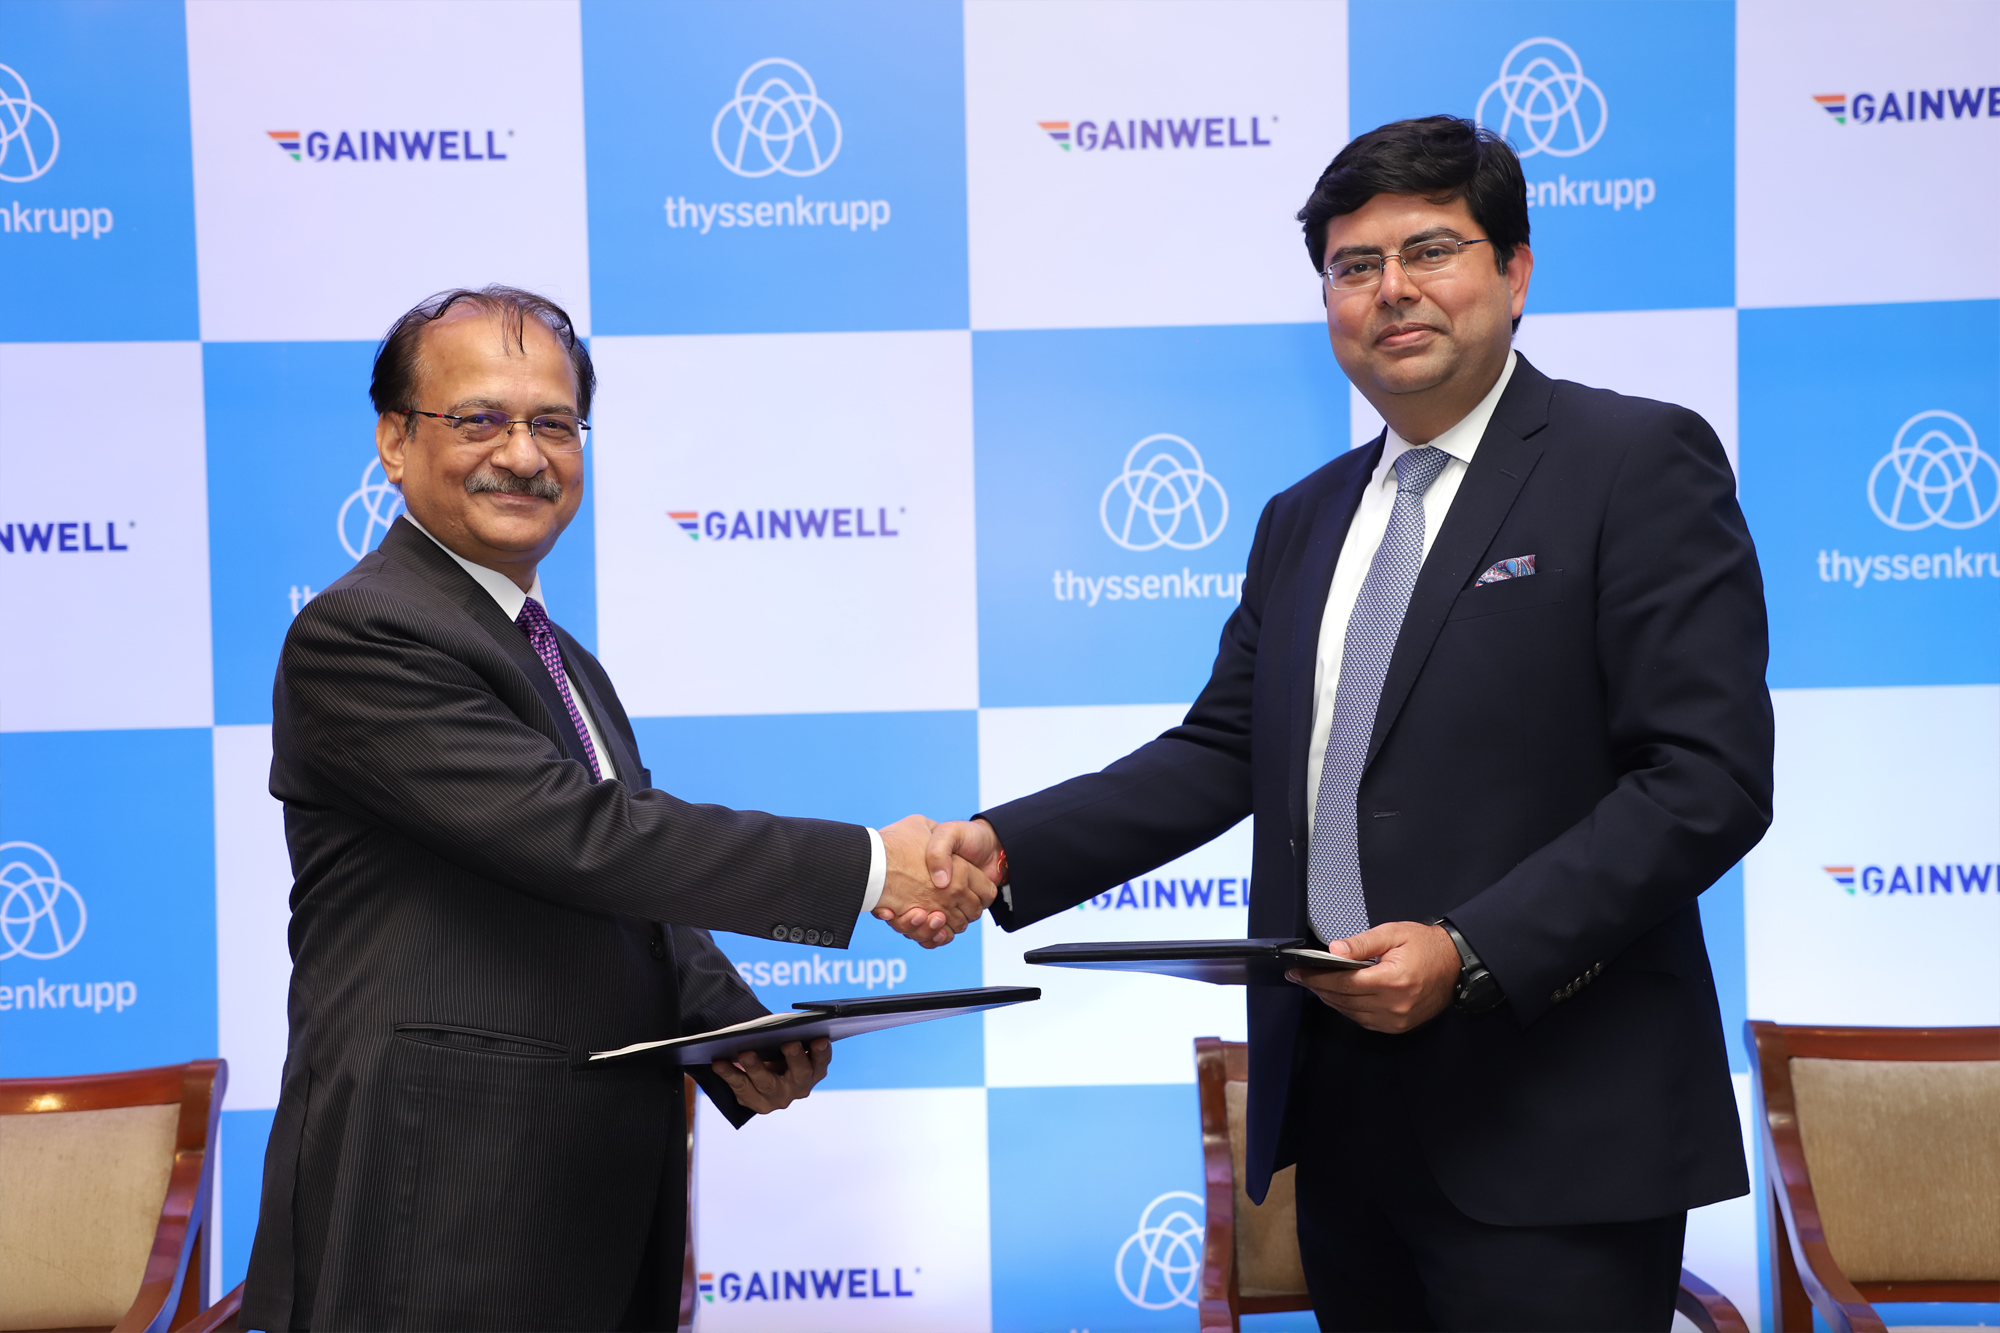 Thyssenkrupp inks distribution pact with Gainwell